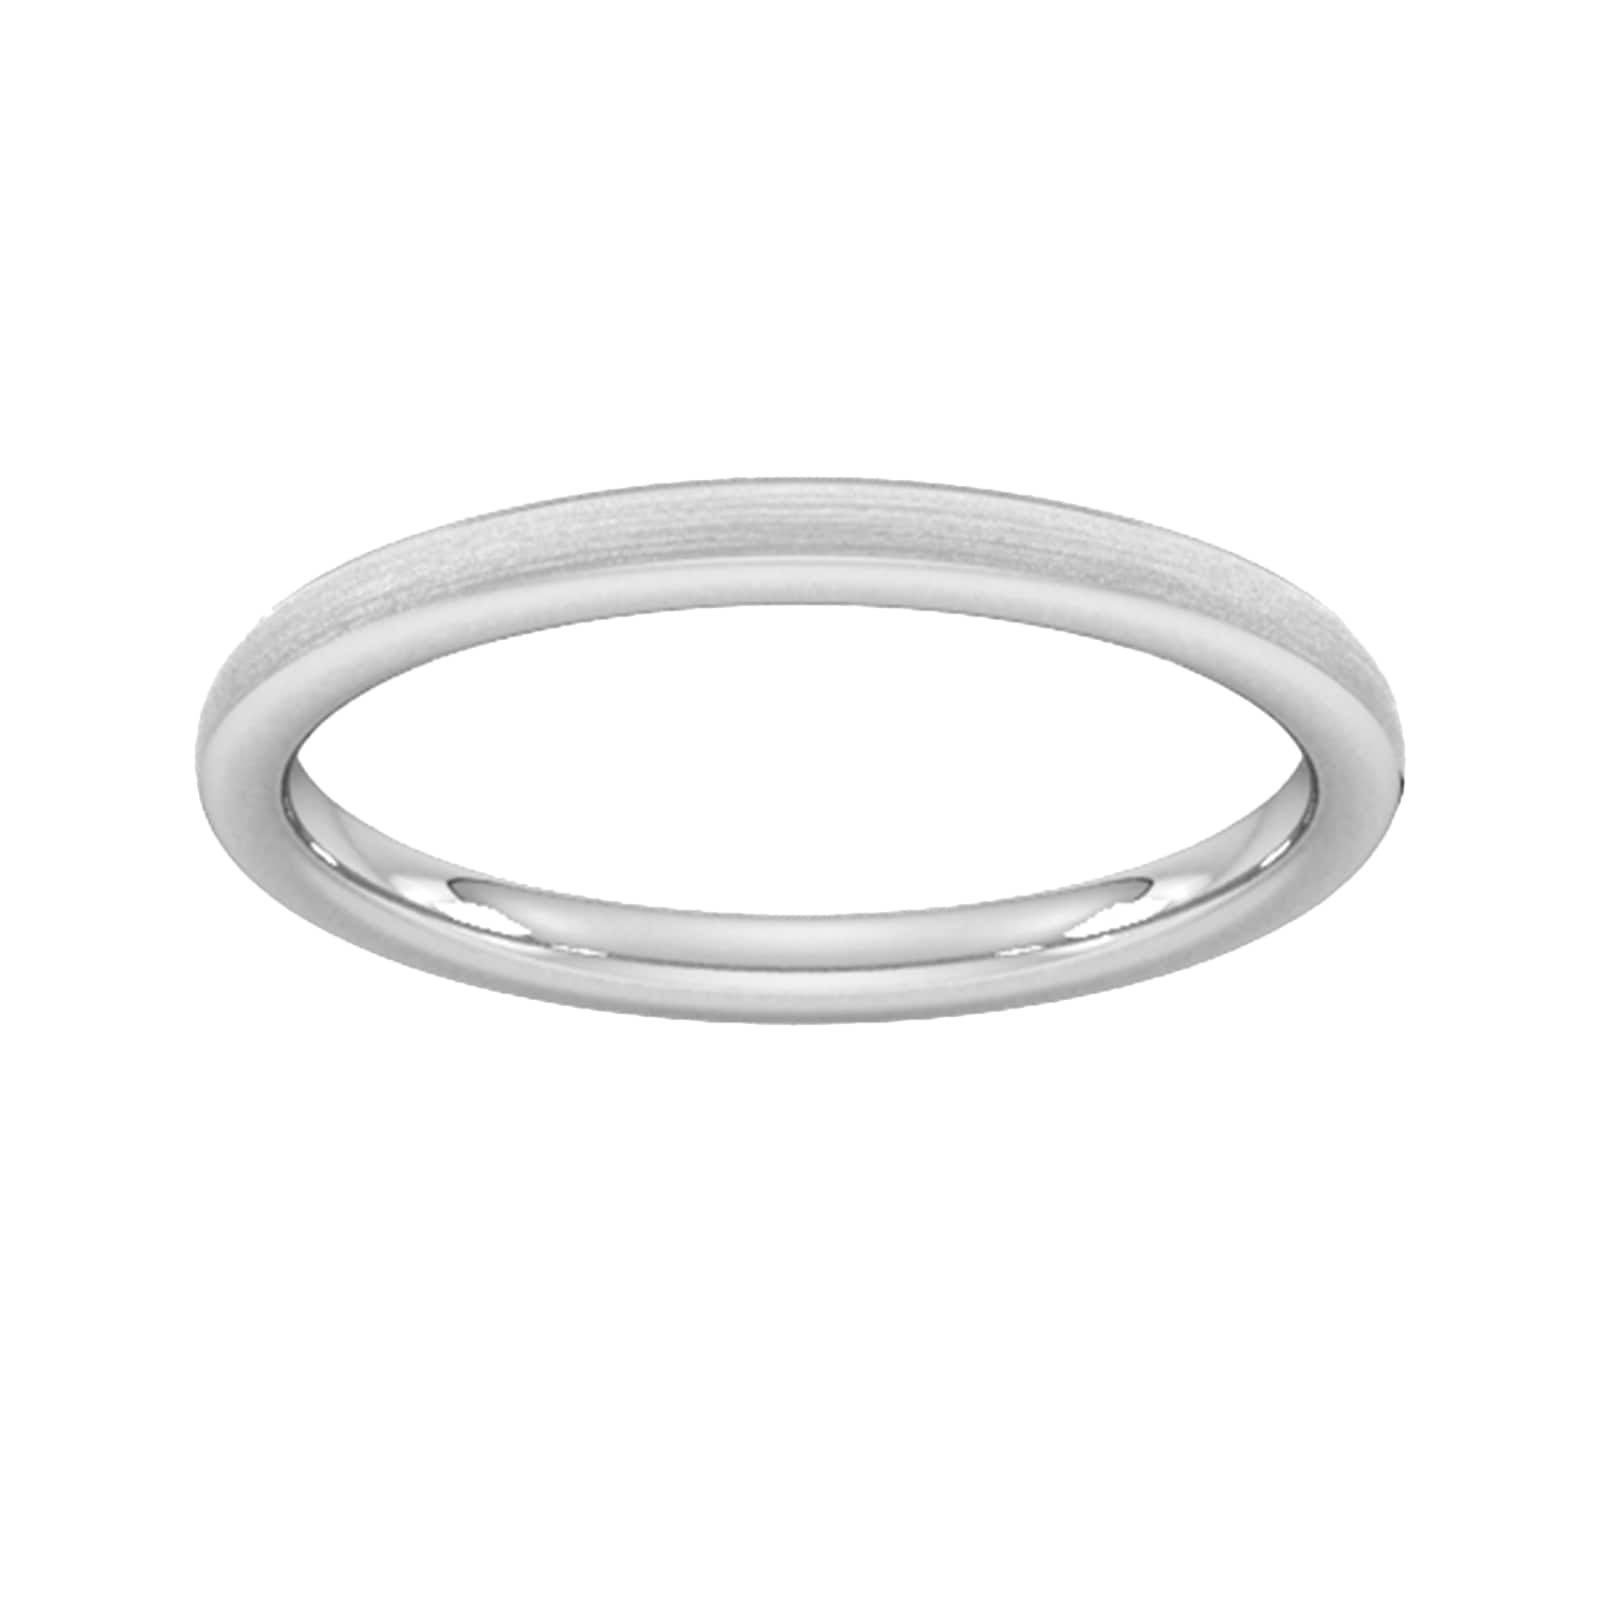 2mm Slight Court Extra Heavy Matt Finished Wedding Ring In 9 Carat White Gold - Ring Size L